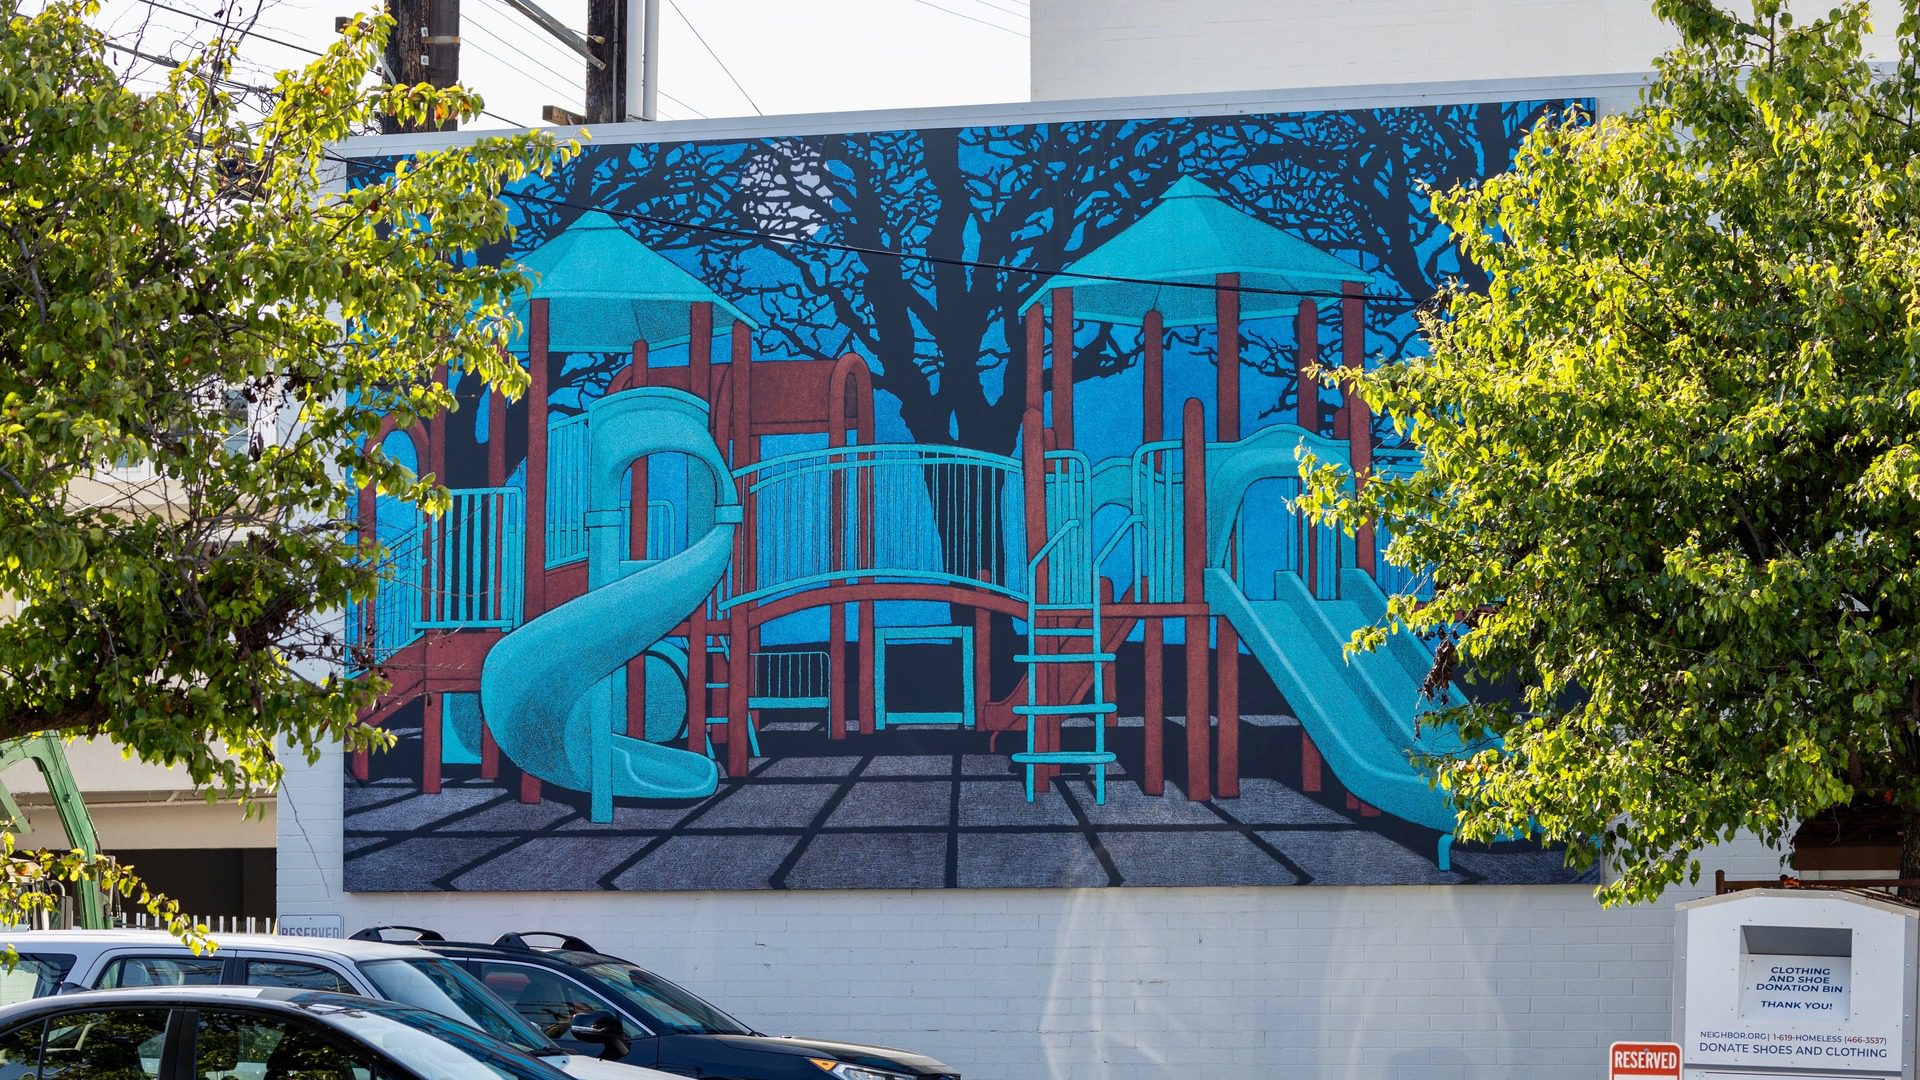 mural by Amy Adler installed on side of building is life size painting of a childrens playground